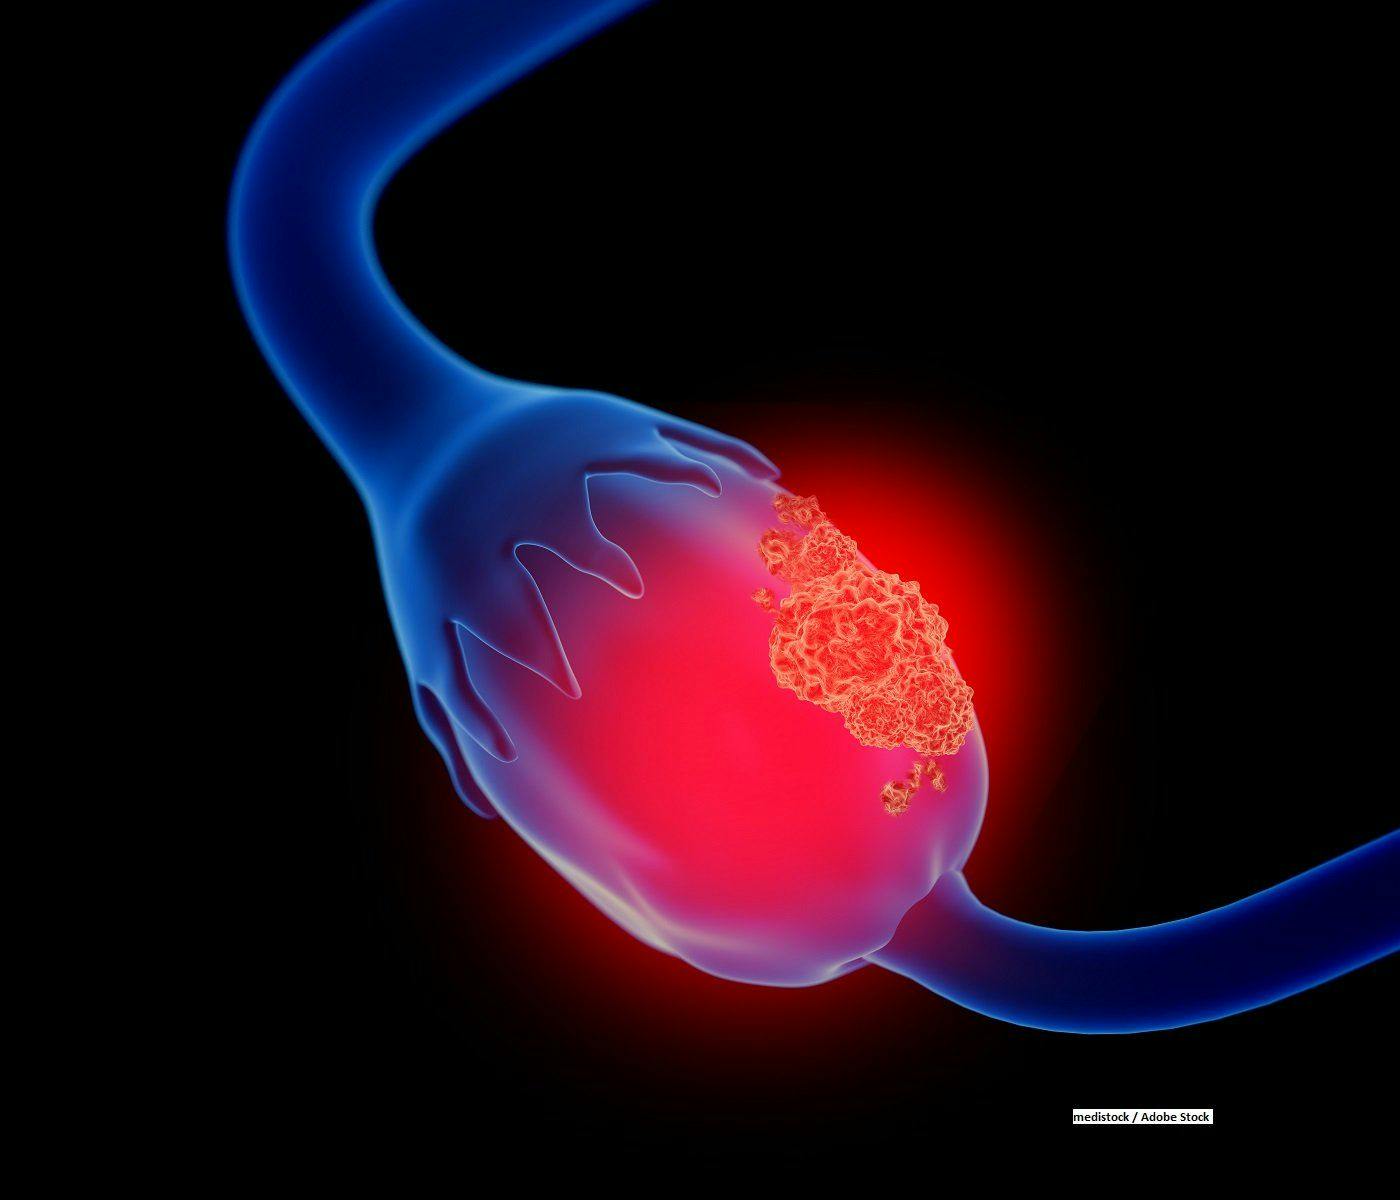 Oncogene S100A10 May Play Role in Progression of Ovarian Cancer